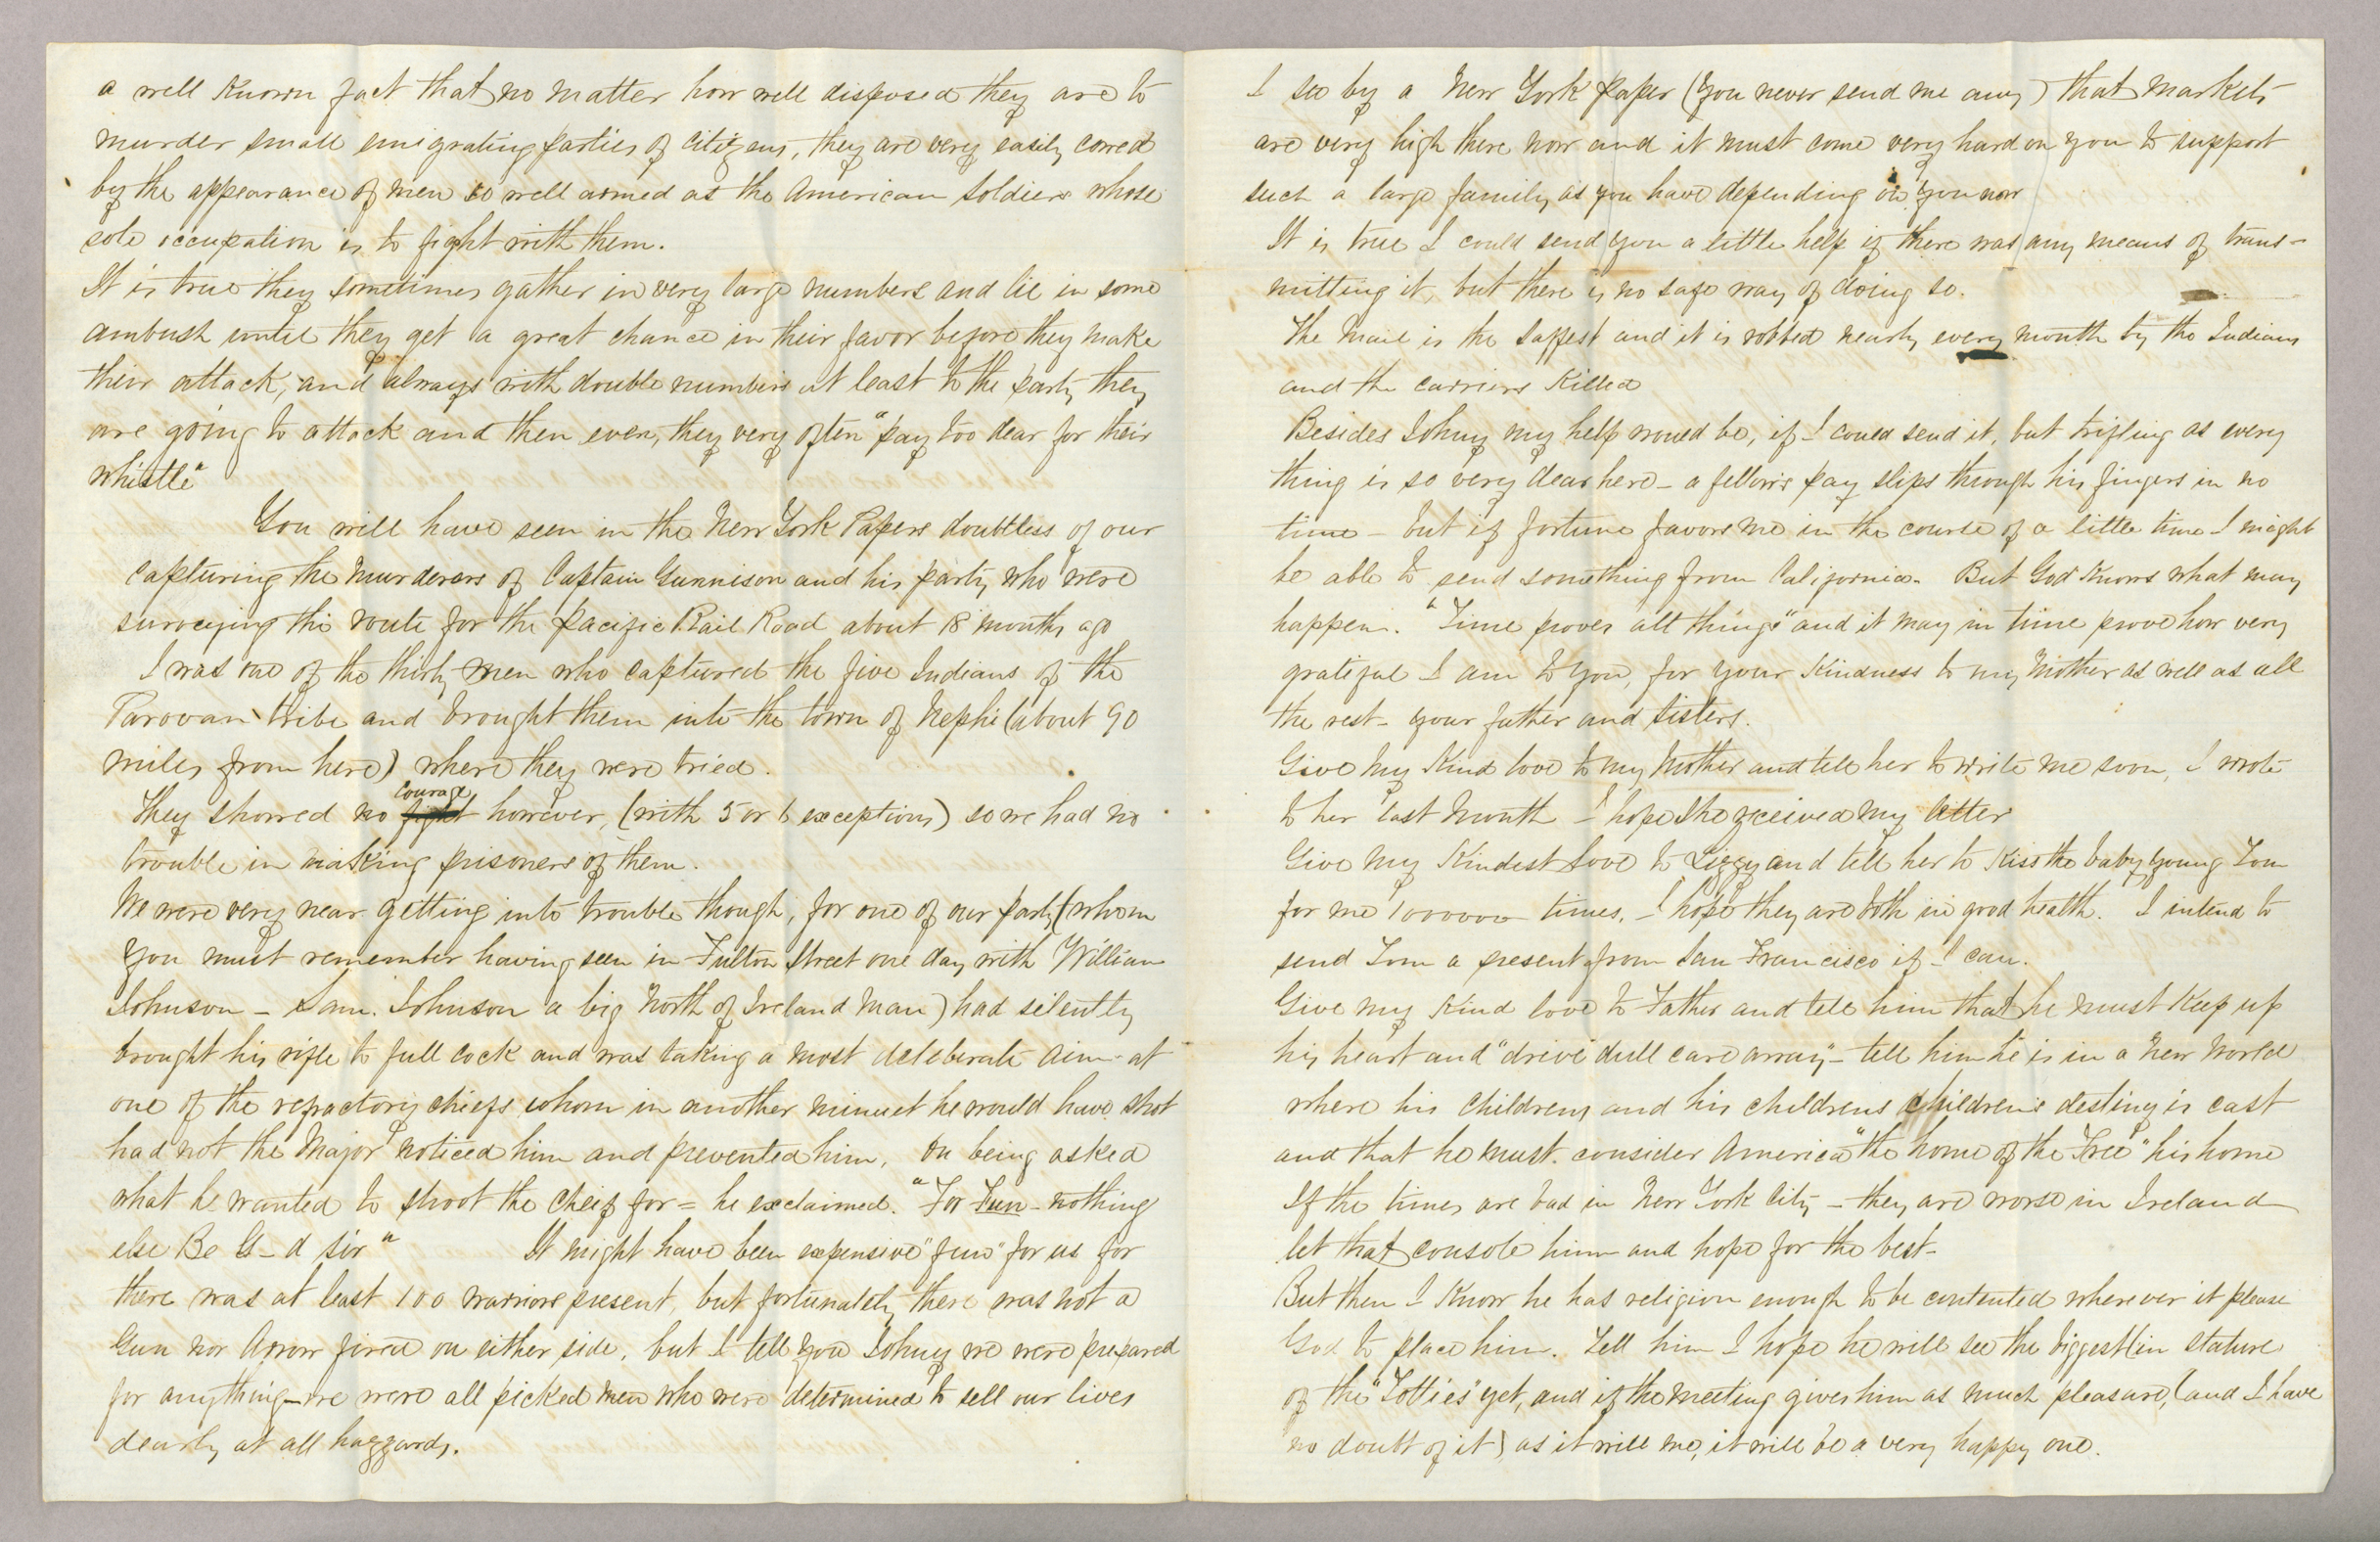 Letter. Tho[ma]s L[owry] Young, Great Salt Lake City, Utah Territory, to "Dear John" [John E. Brownlee], n. p., Pages 2-3